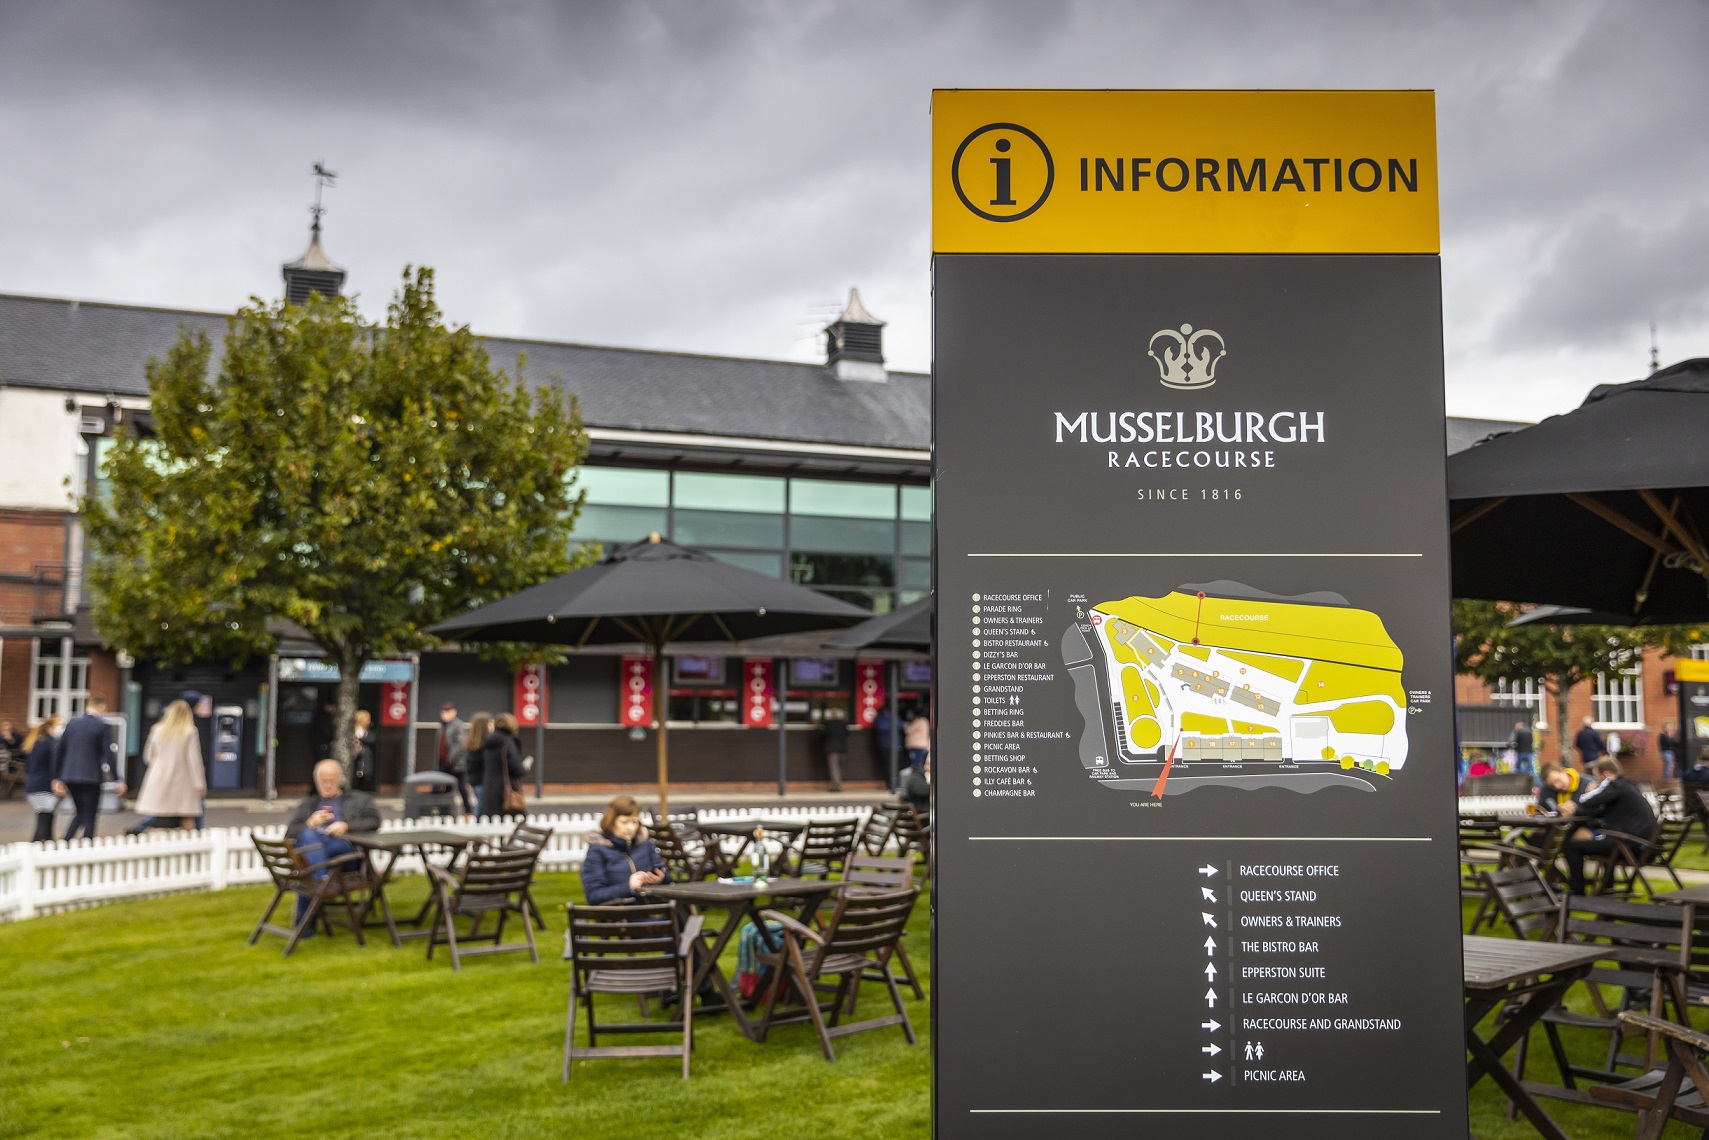 Information sign at Musselburgh Racecourse